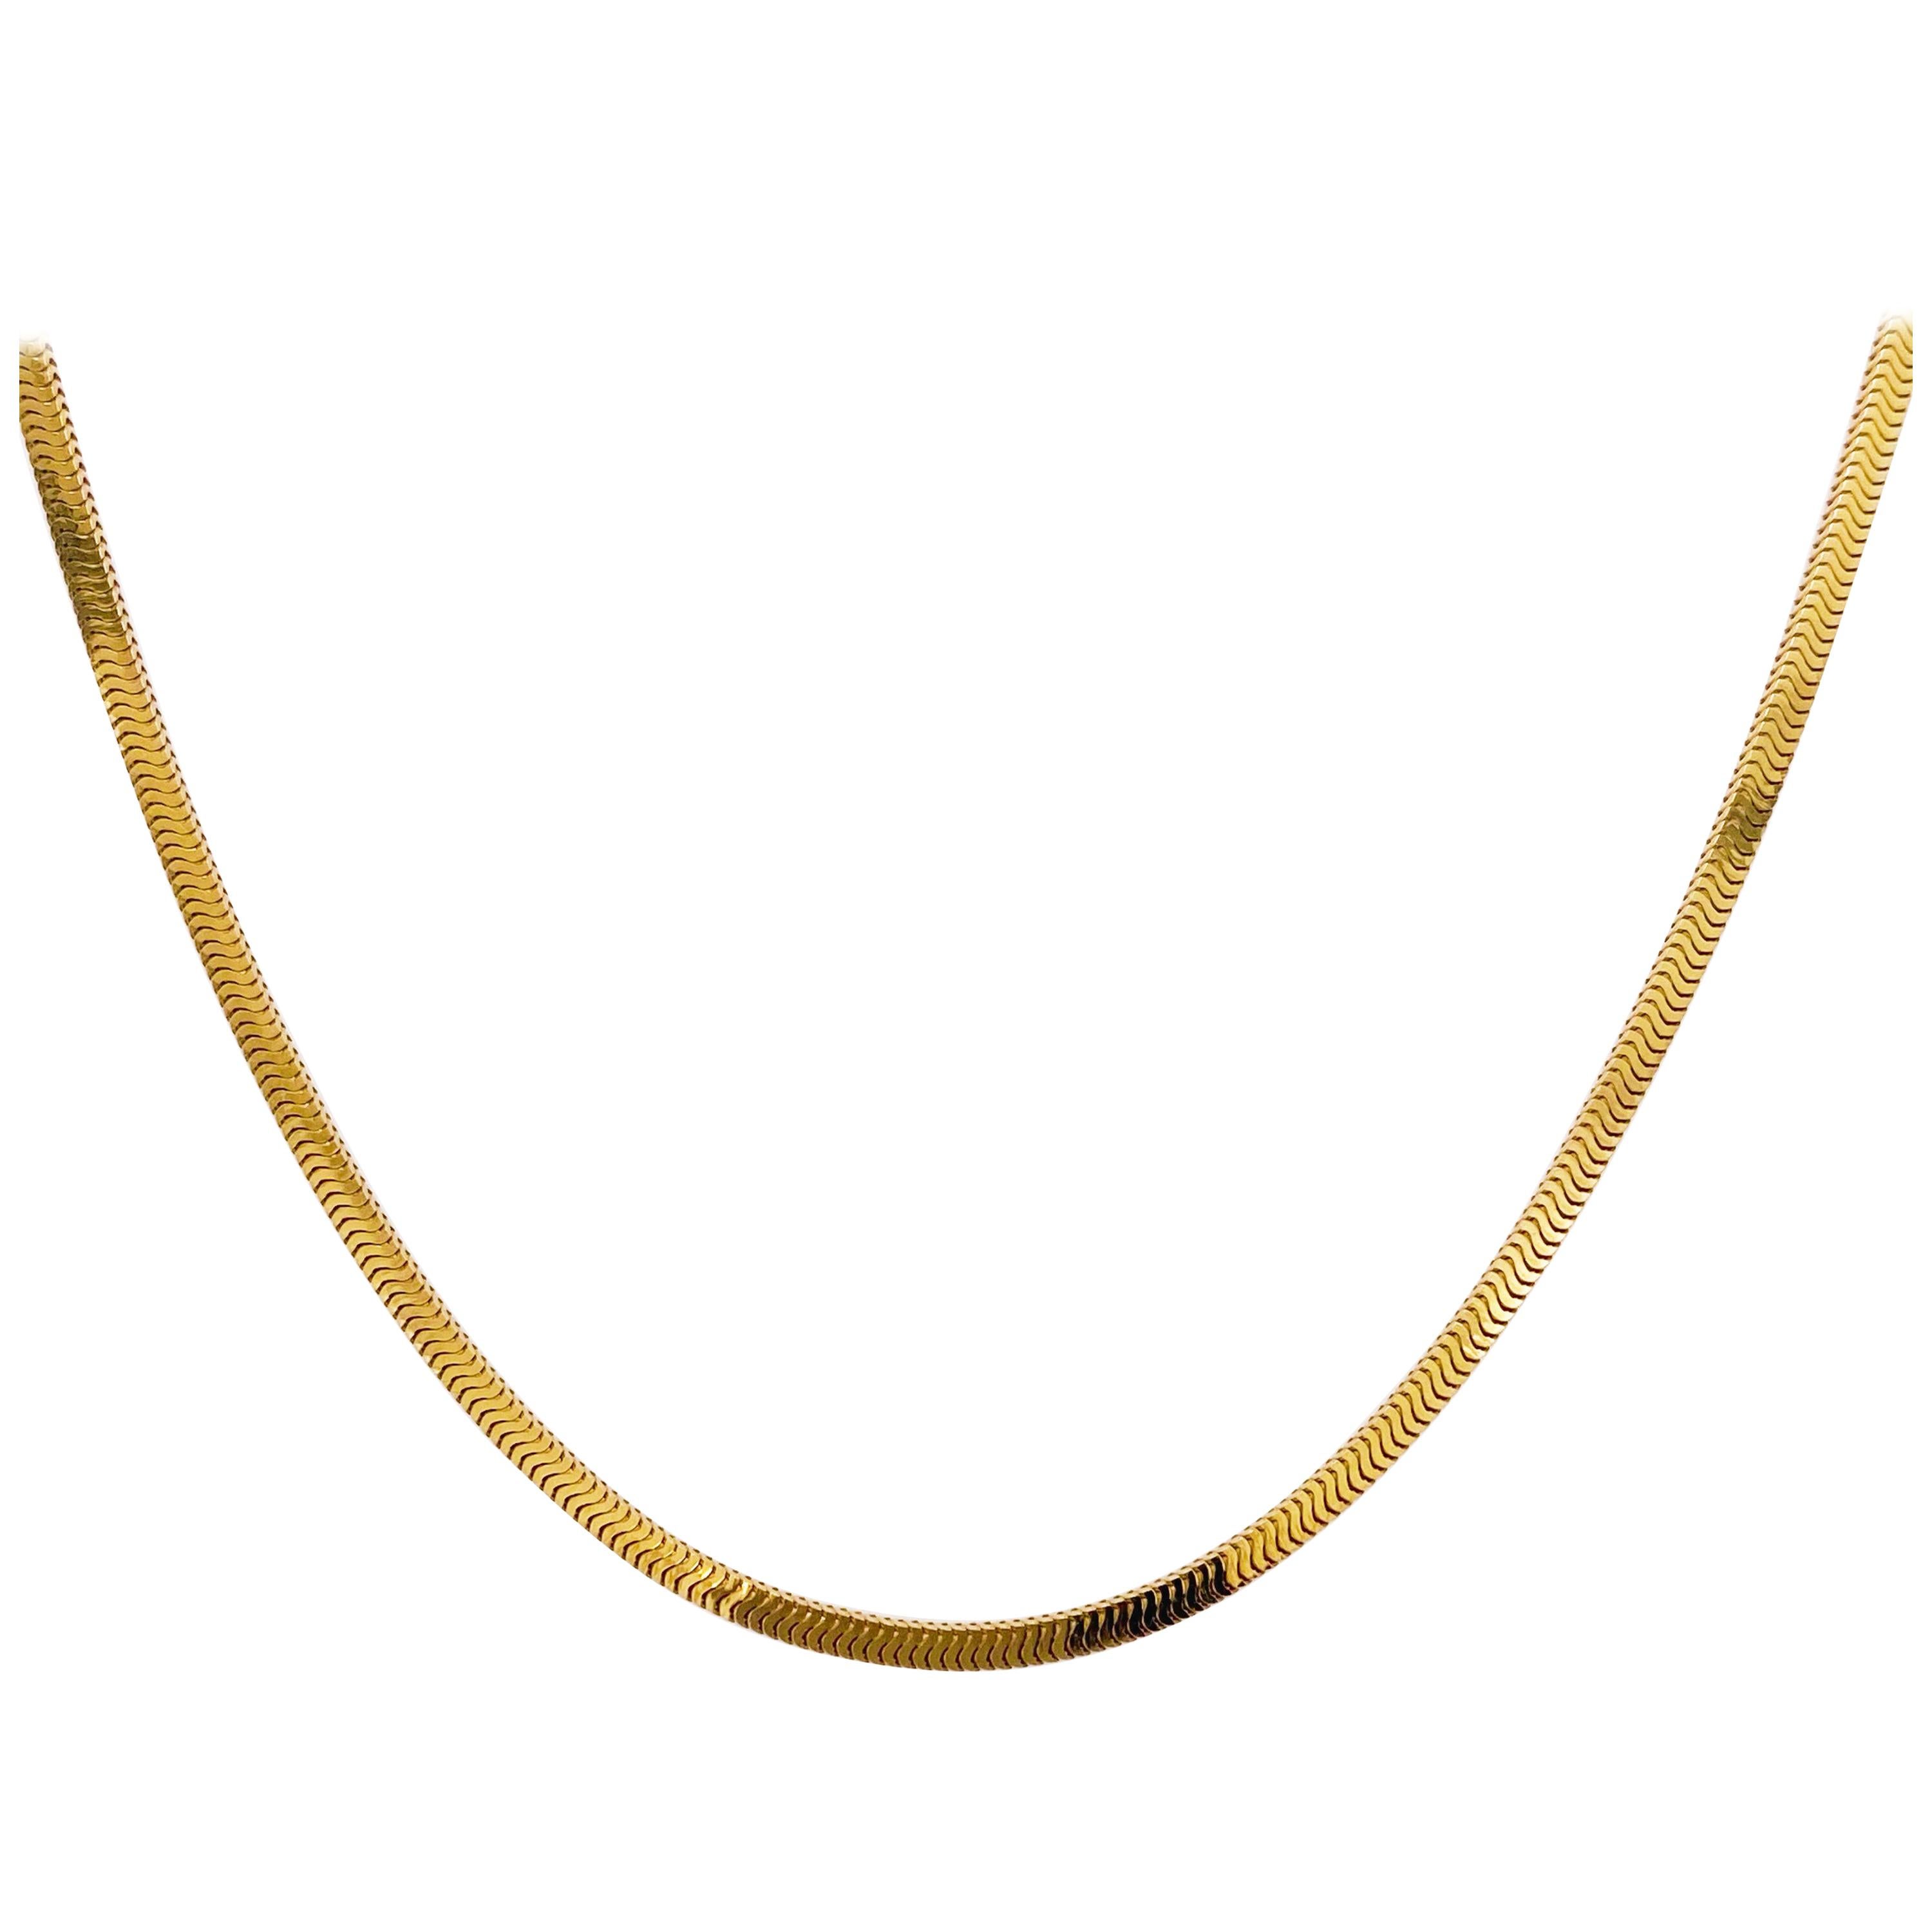 Snake Box Chain in 14 Karat Yellow Gold, Square Smooth Snake Chain